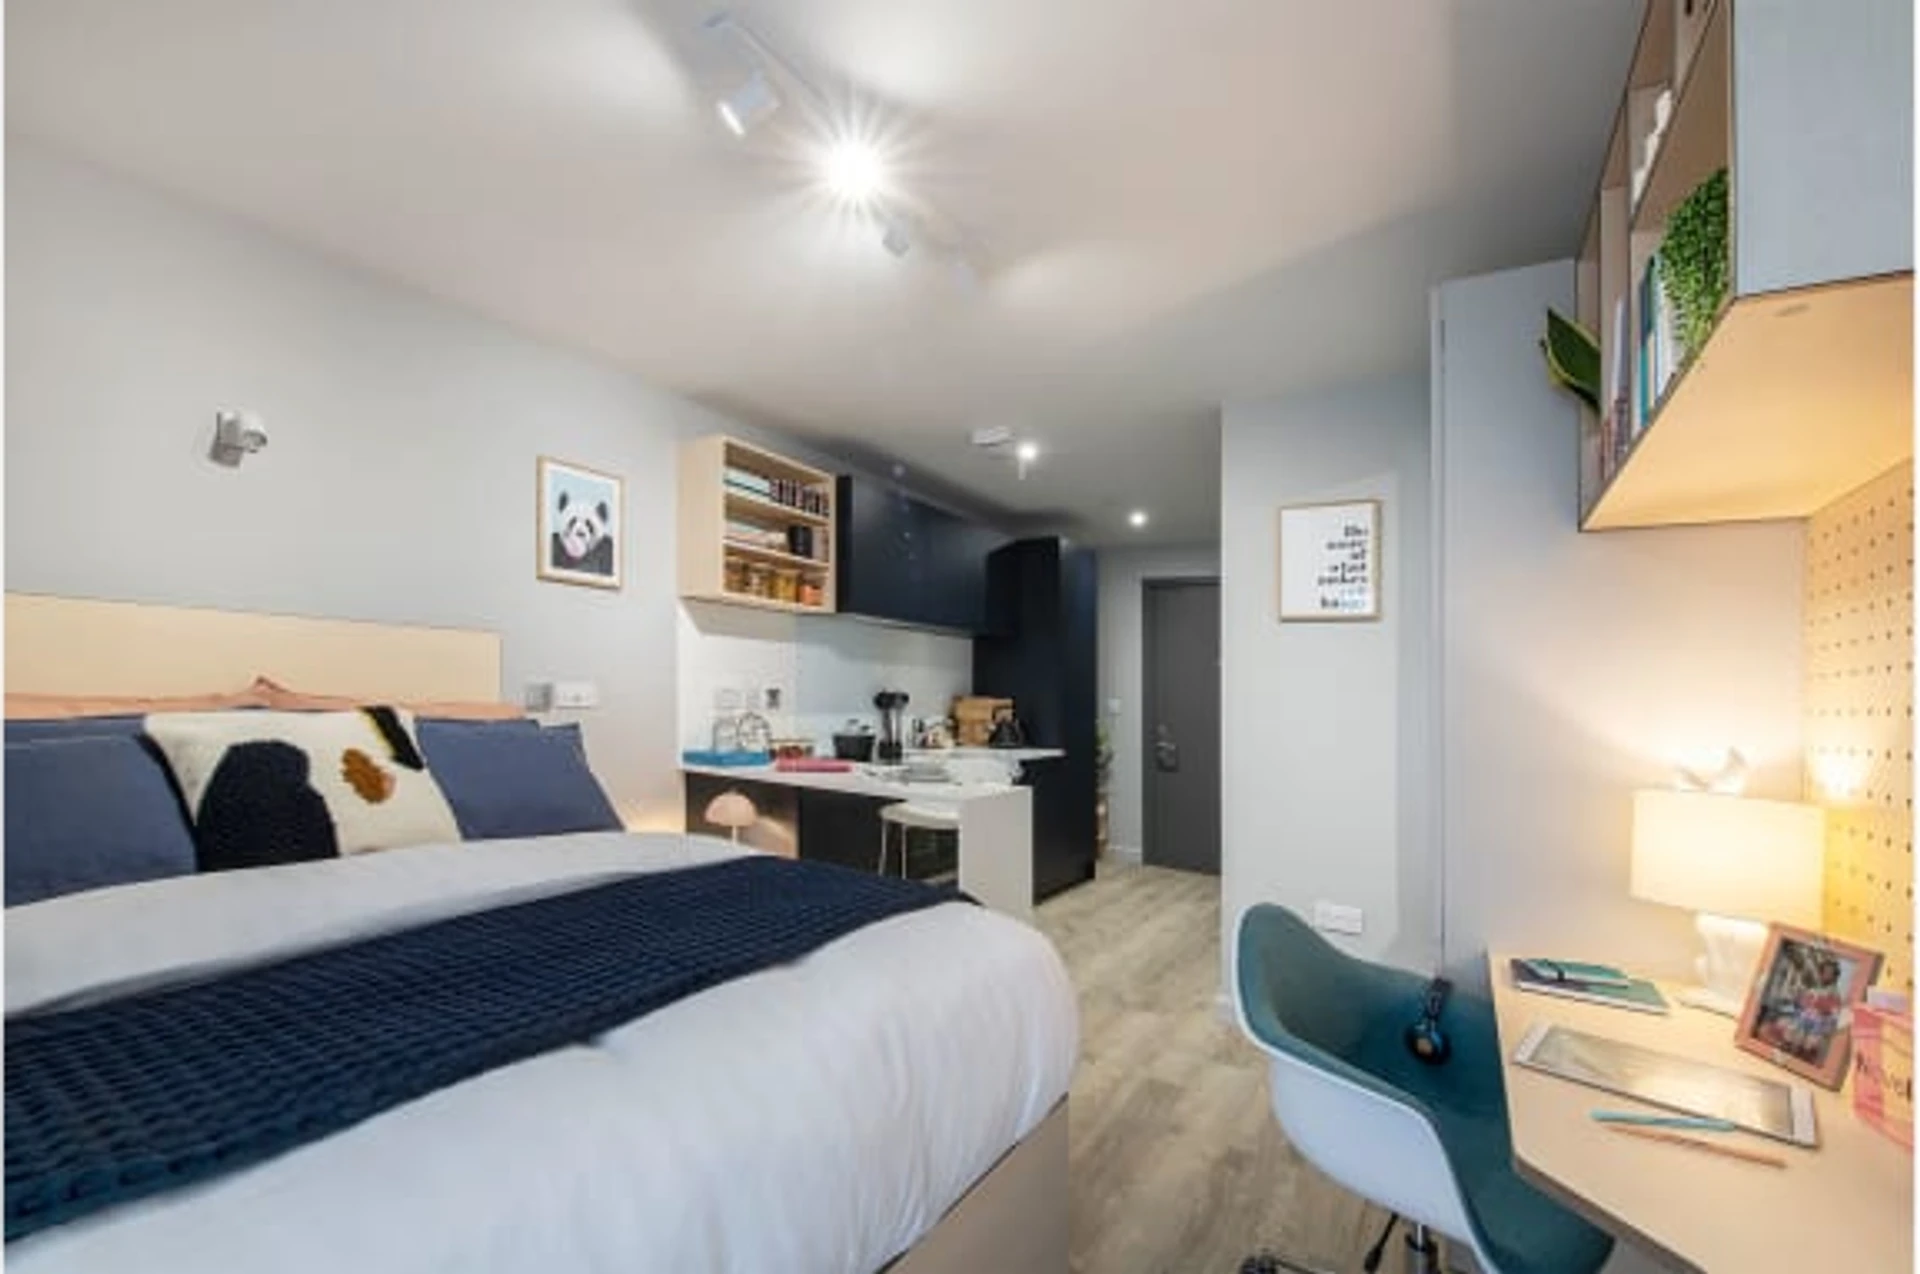 Renting rooms by the month in Edinburgh